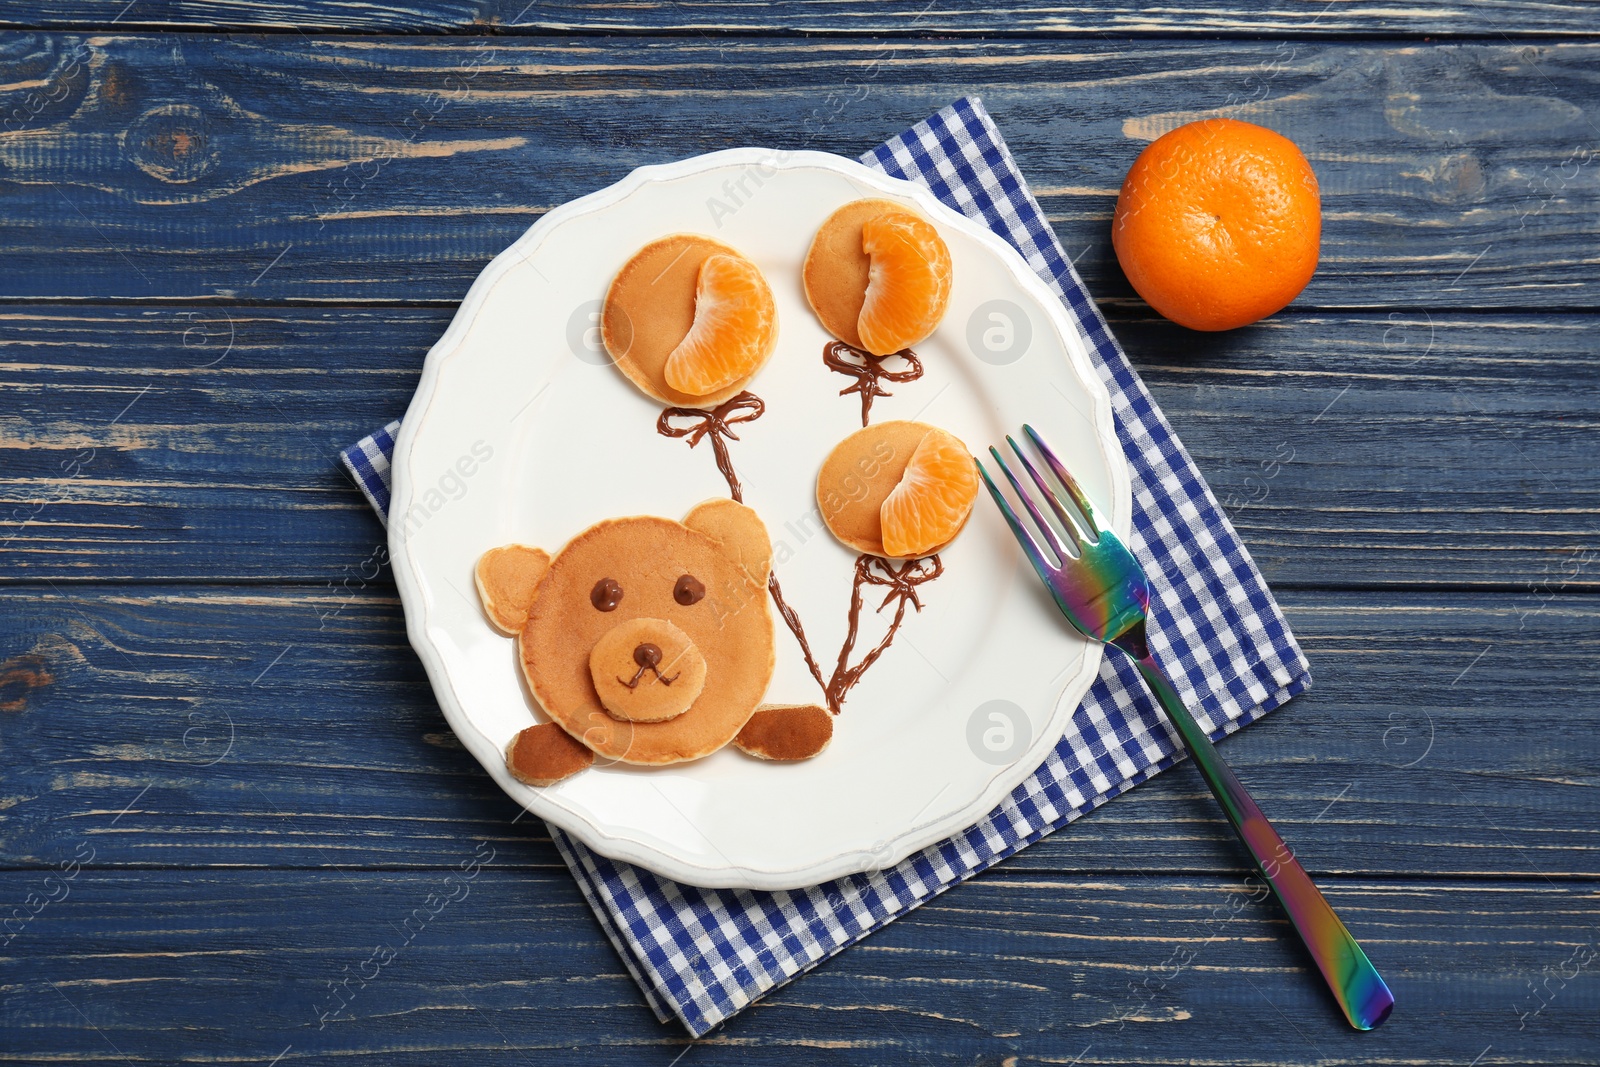 Photo of Flat lay composition with pancakes in form of bear holding balloons on wooden background. Creative breakfast ideas for kids